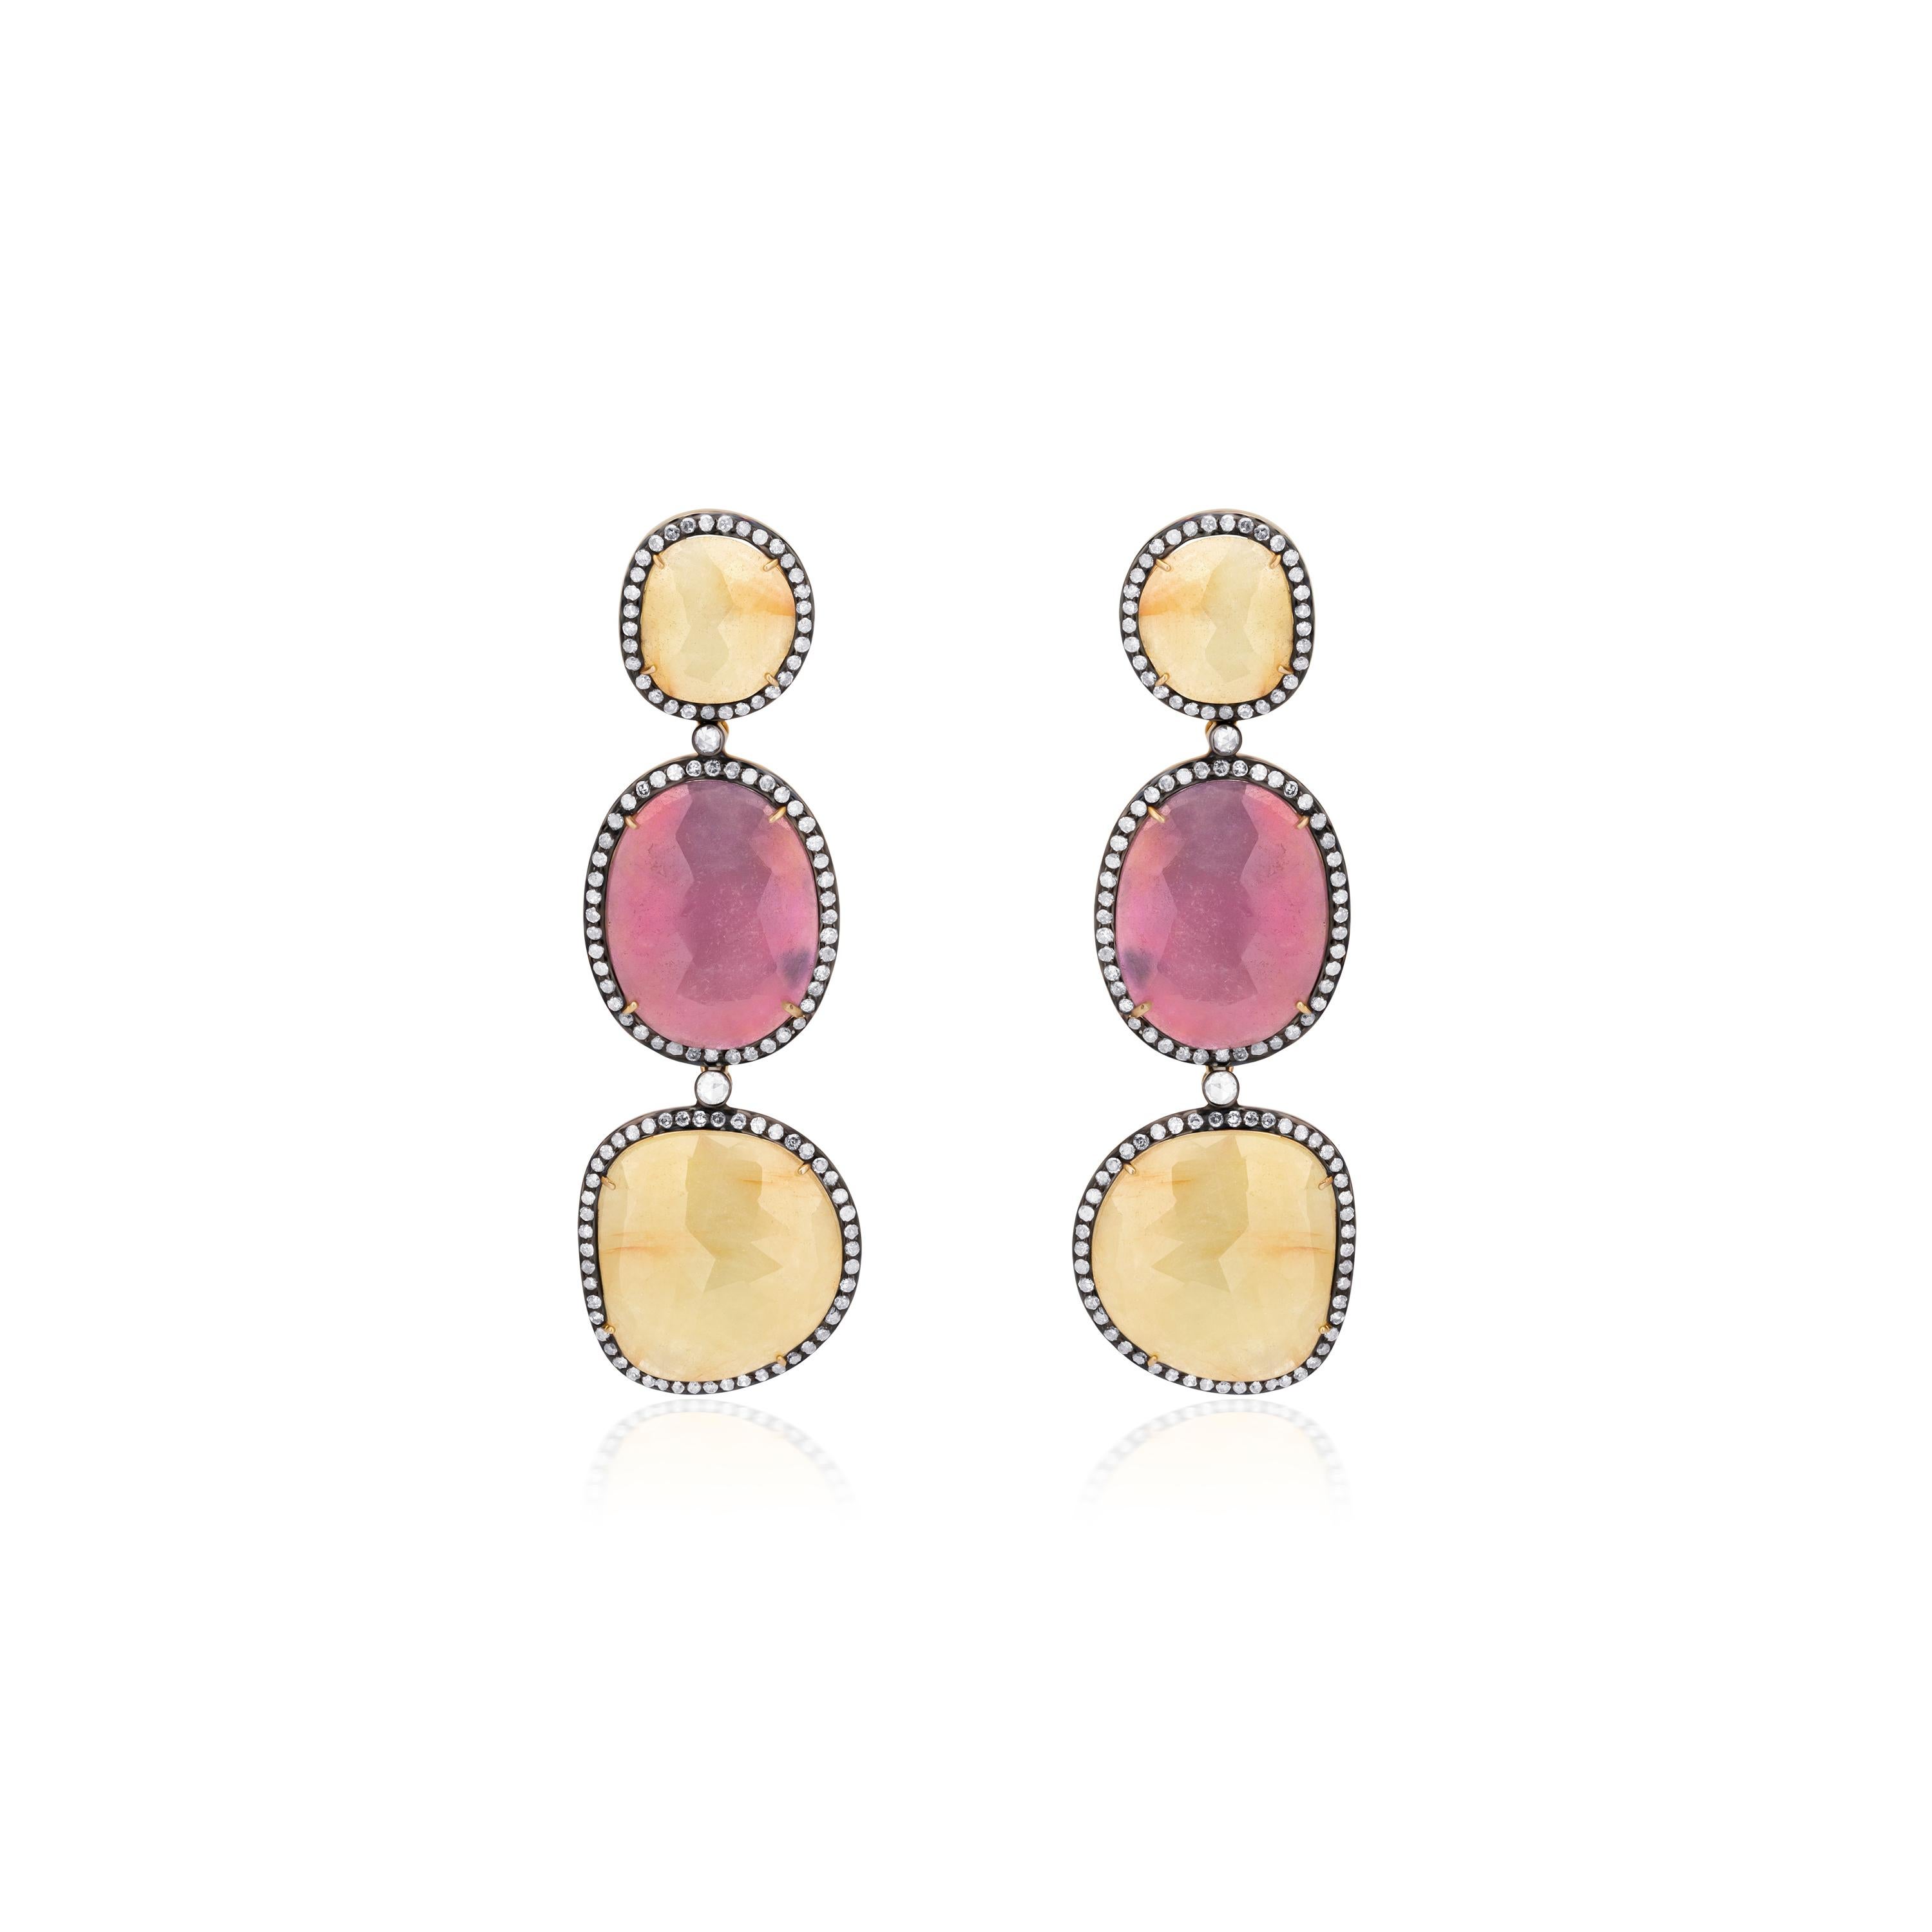 The gleam of sapphires and sparkling diamonds is always a wining combination. These Victorian inspired jewels crafted in 18K gold and 925 sterling silver feature faceted cabochons of pink and yellow sapphires graduating in diamond accentuated